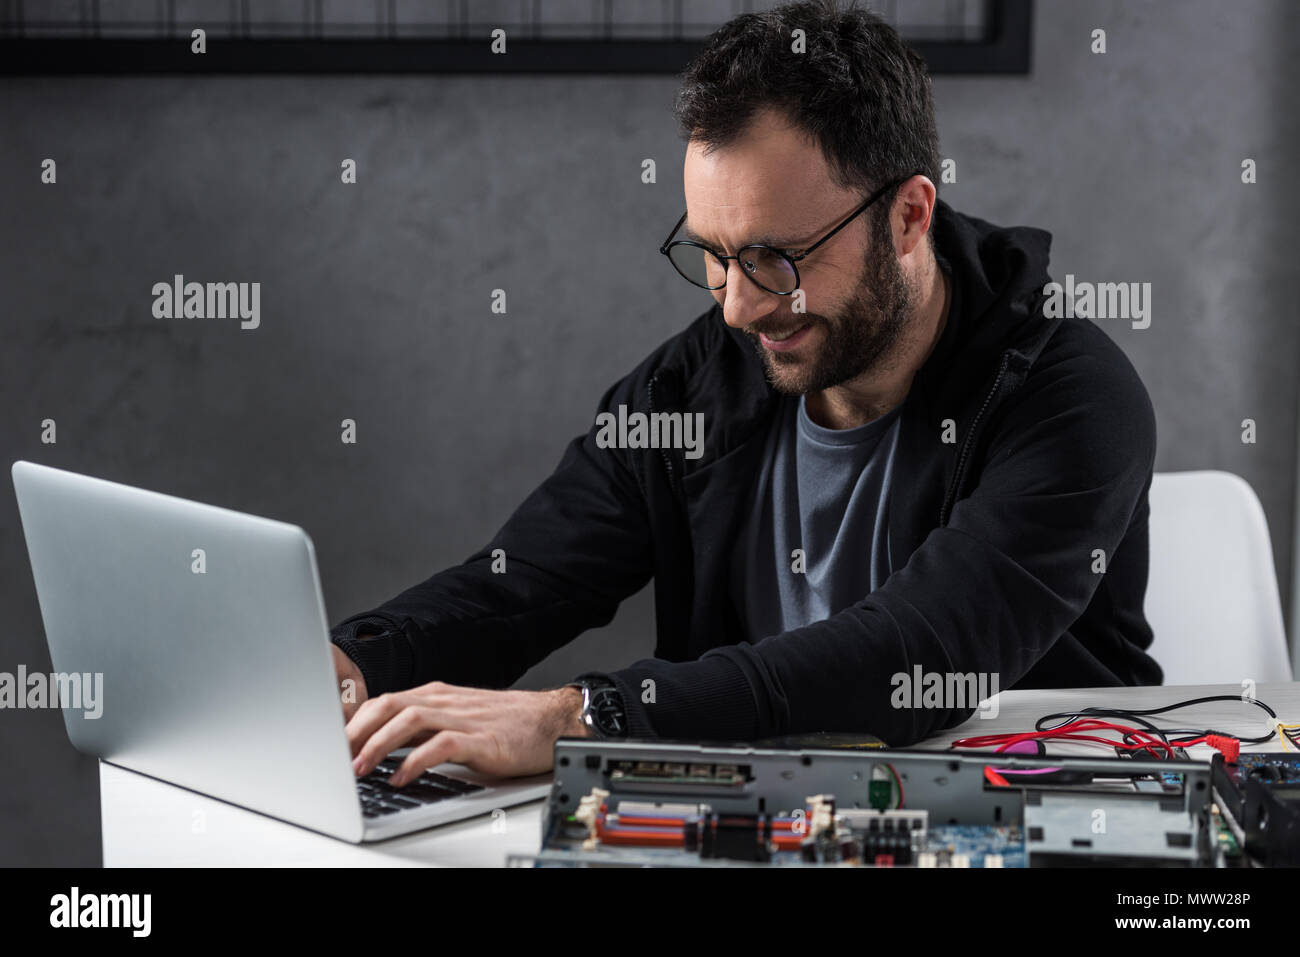 smiling man using laptop against broken pc on table Stock Photo